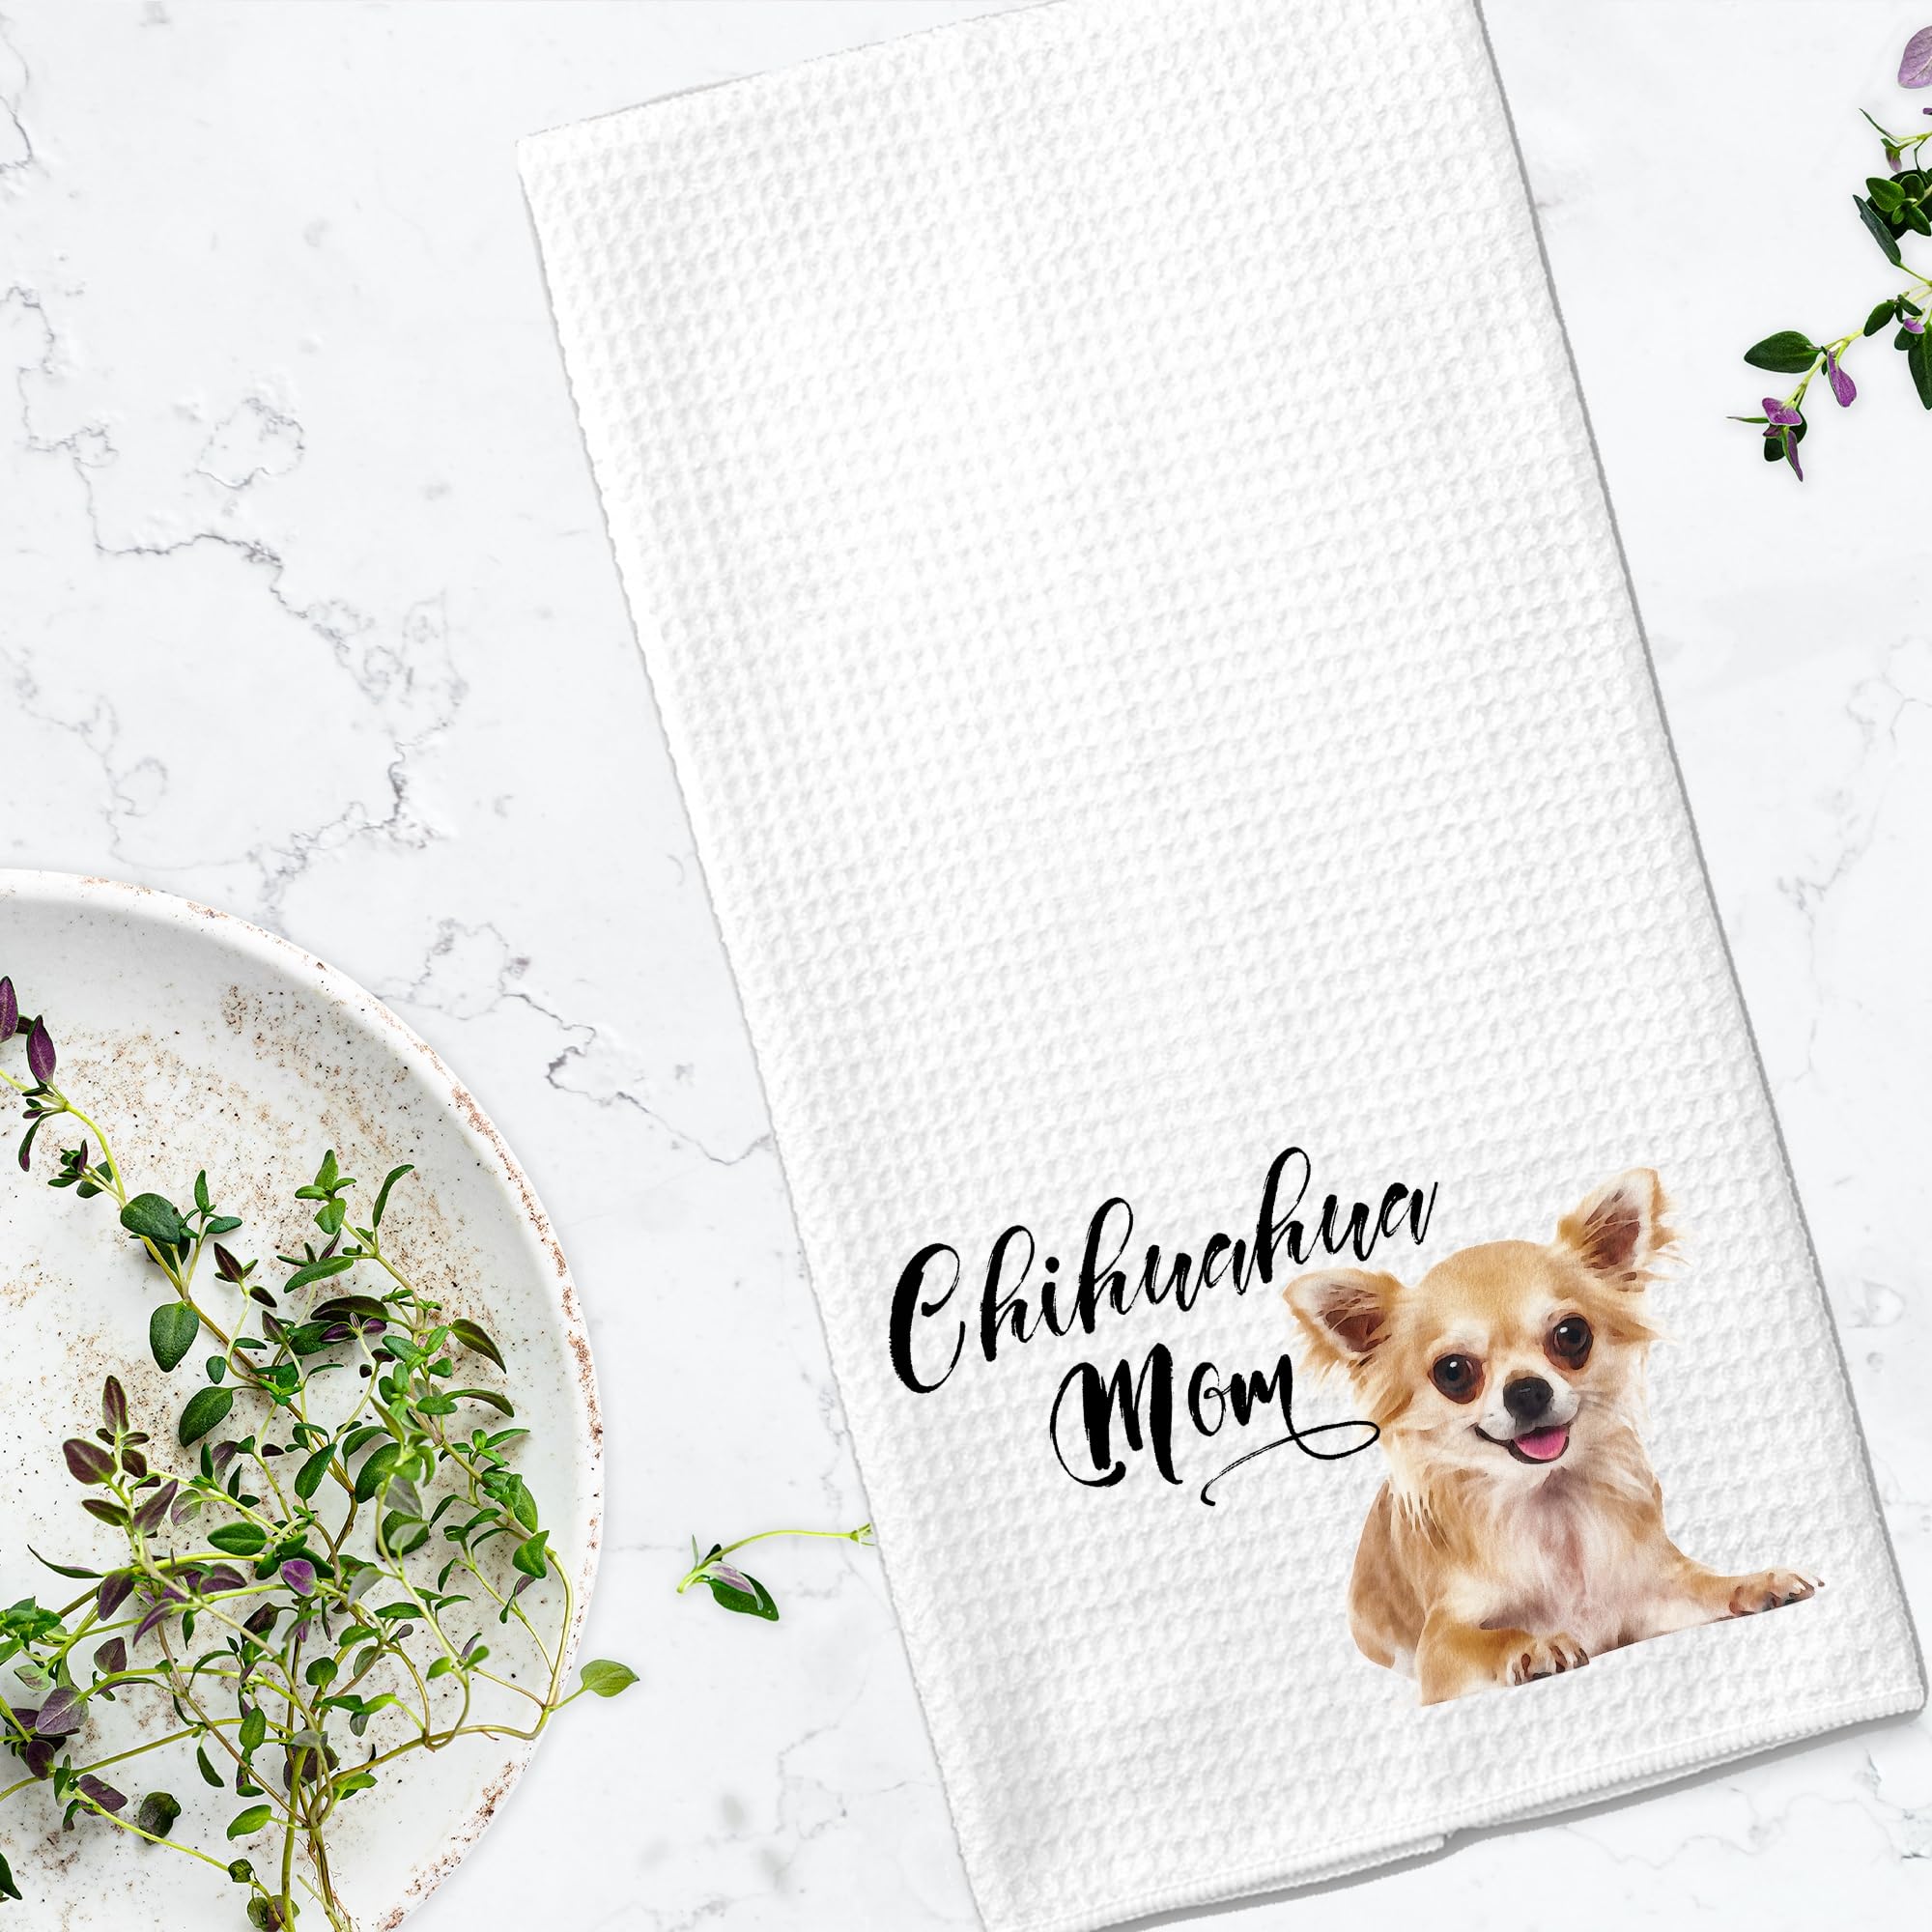 Chihuahua Mom Microfiber Kitchen Towel Gift for Animal Dog Lover